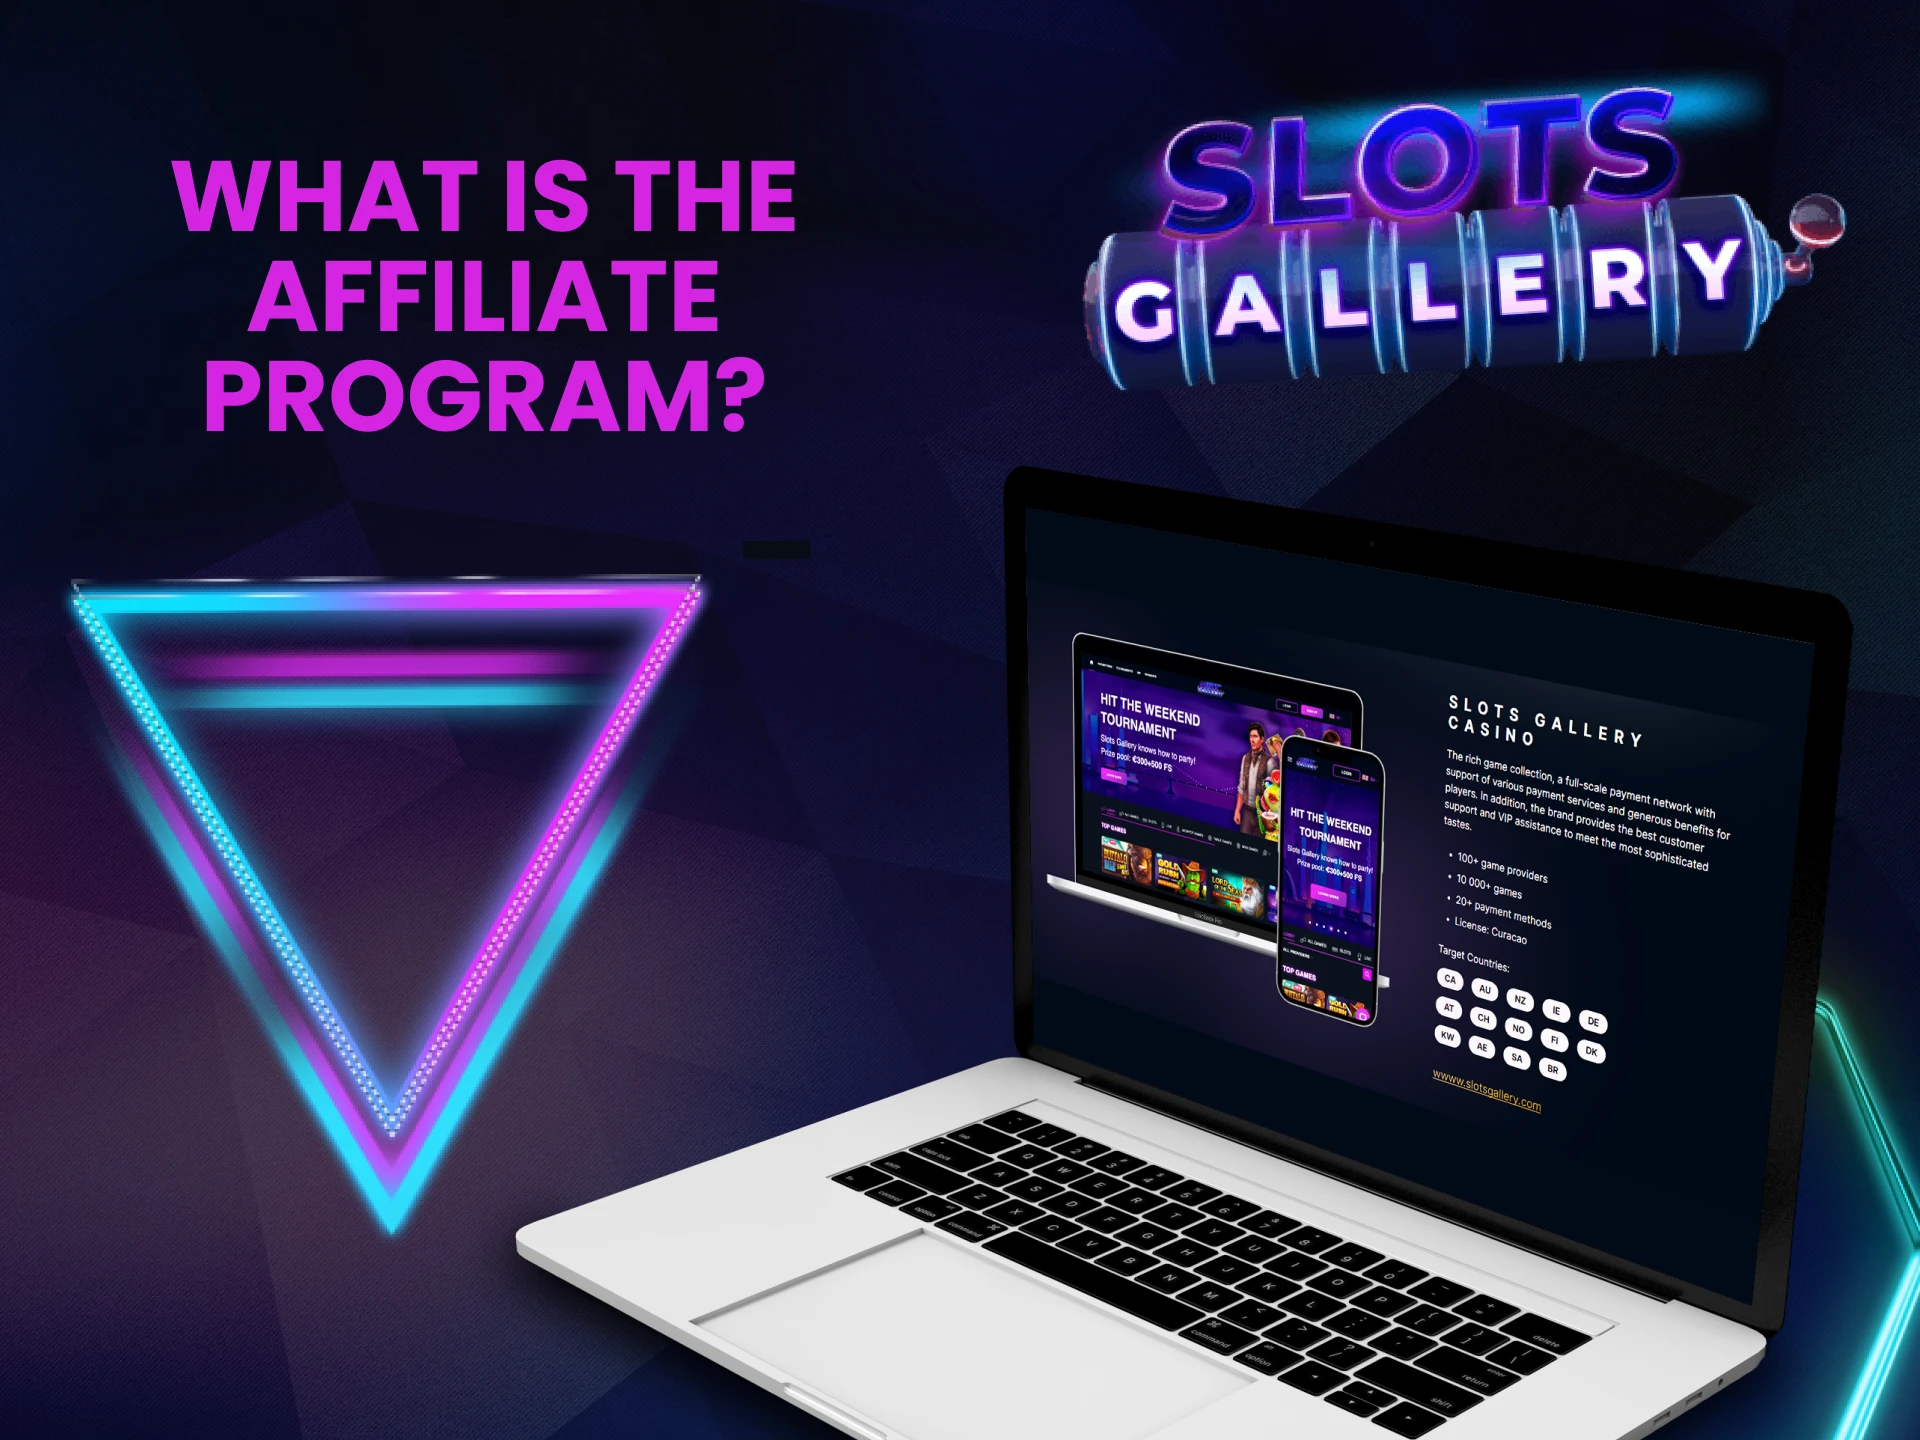 Learn information about the affiliate program from Slots Gallery.